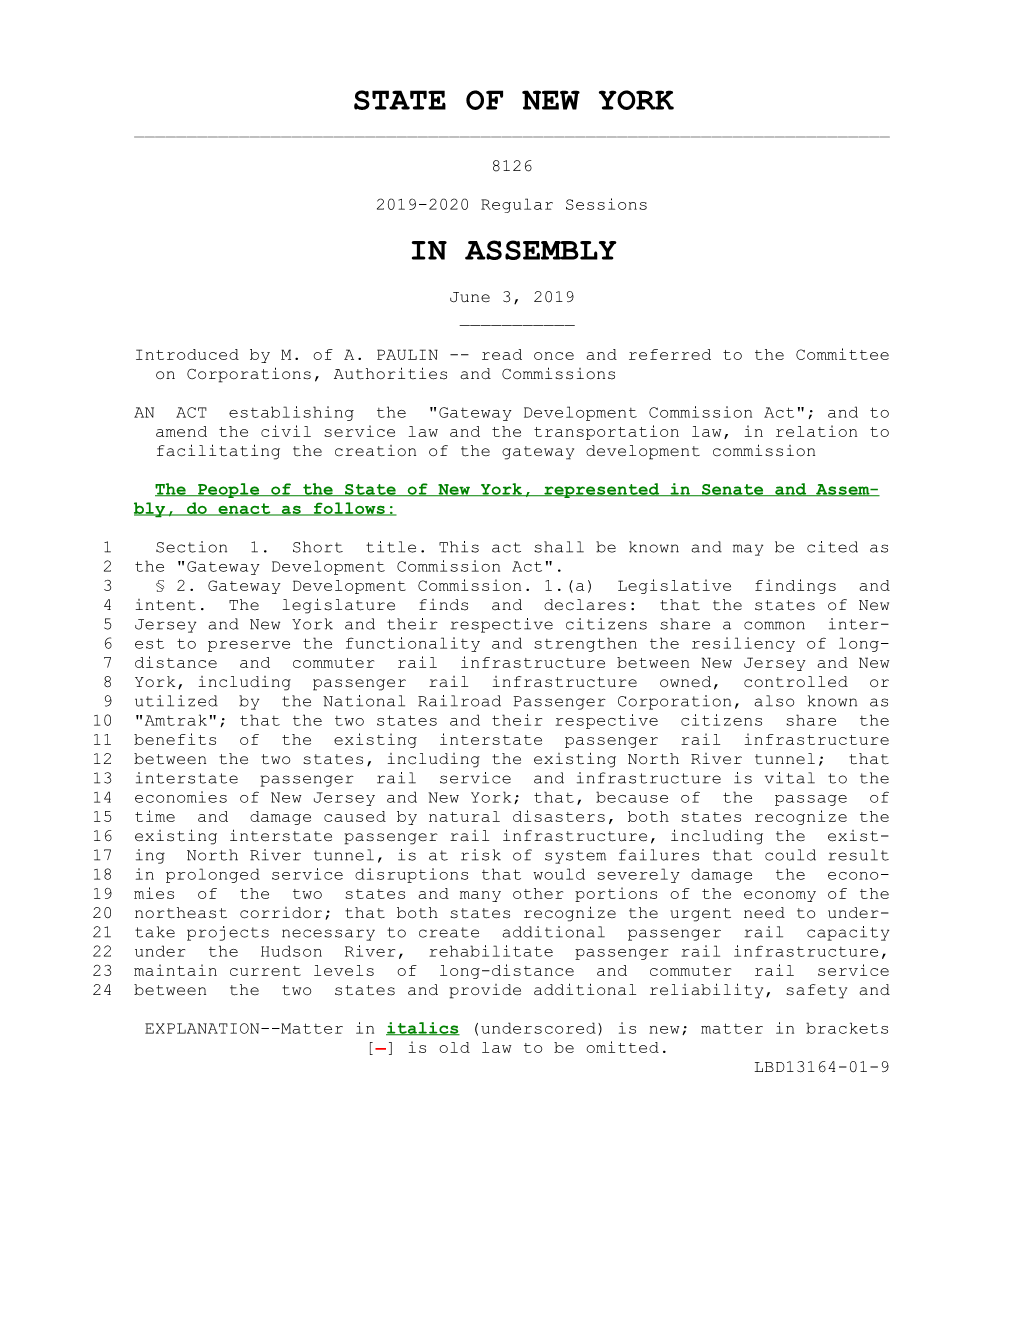 State of New York in Assembly